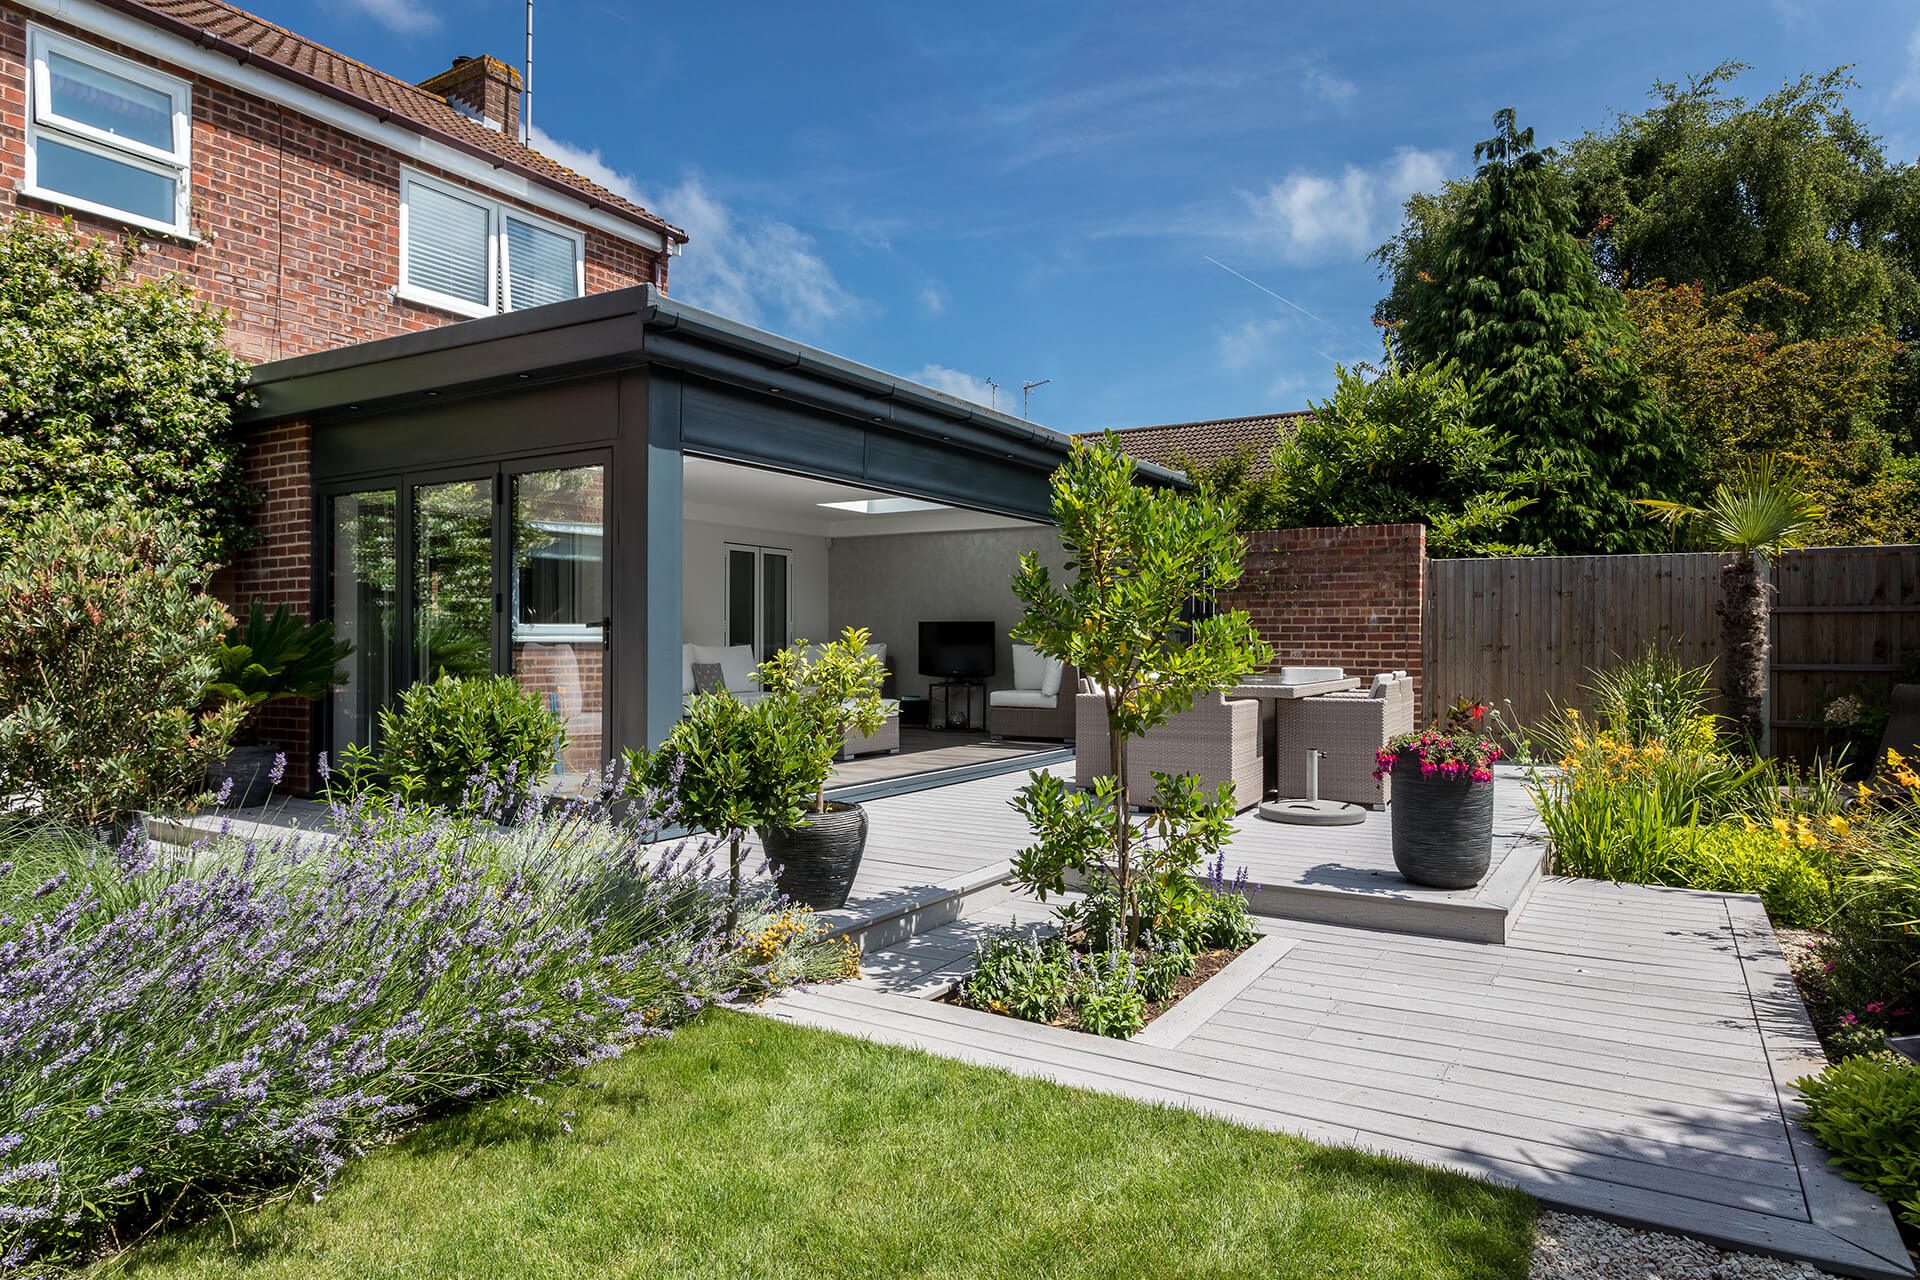 A redesigned garden featuring a garden room opened up to form a continous link to the house